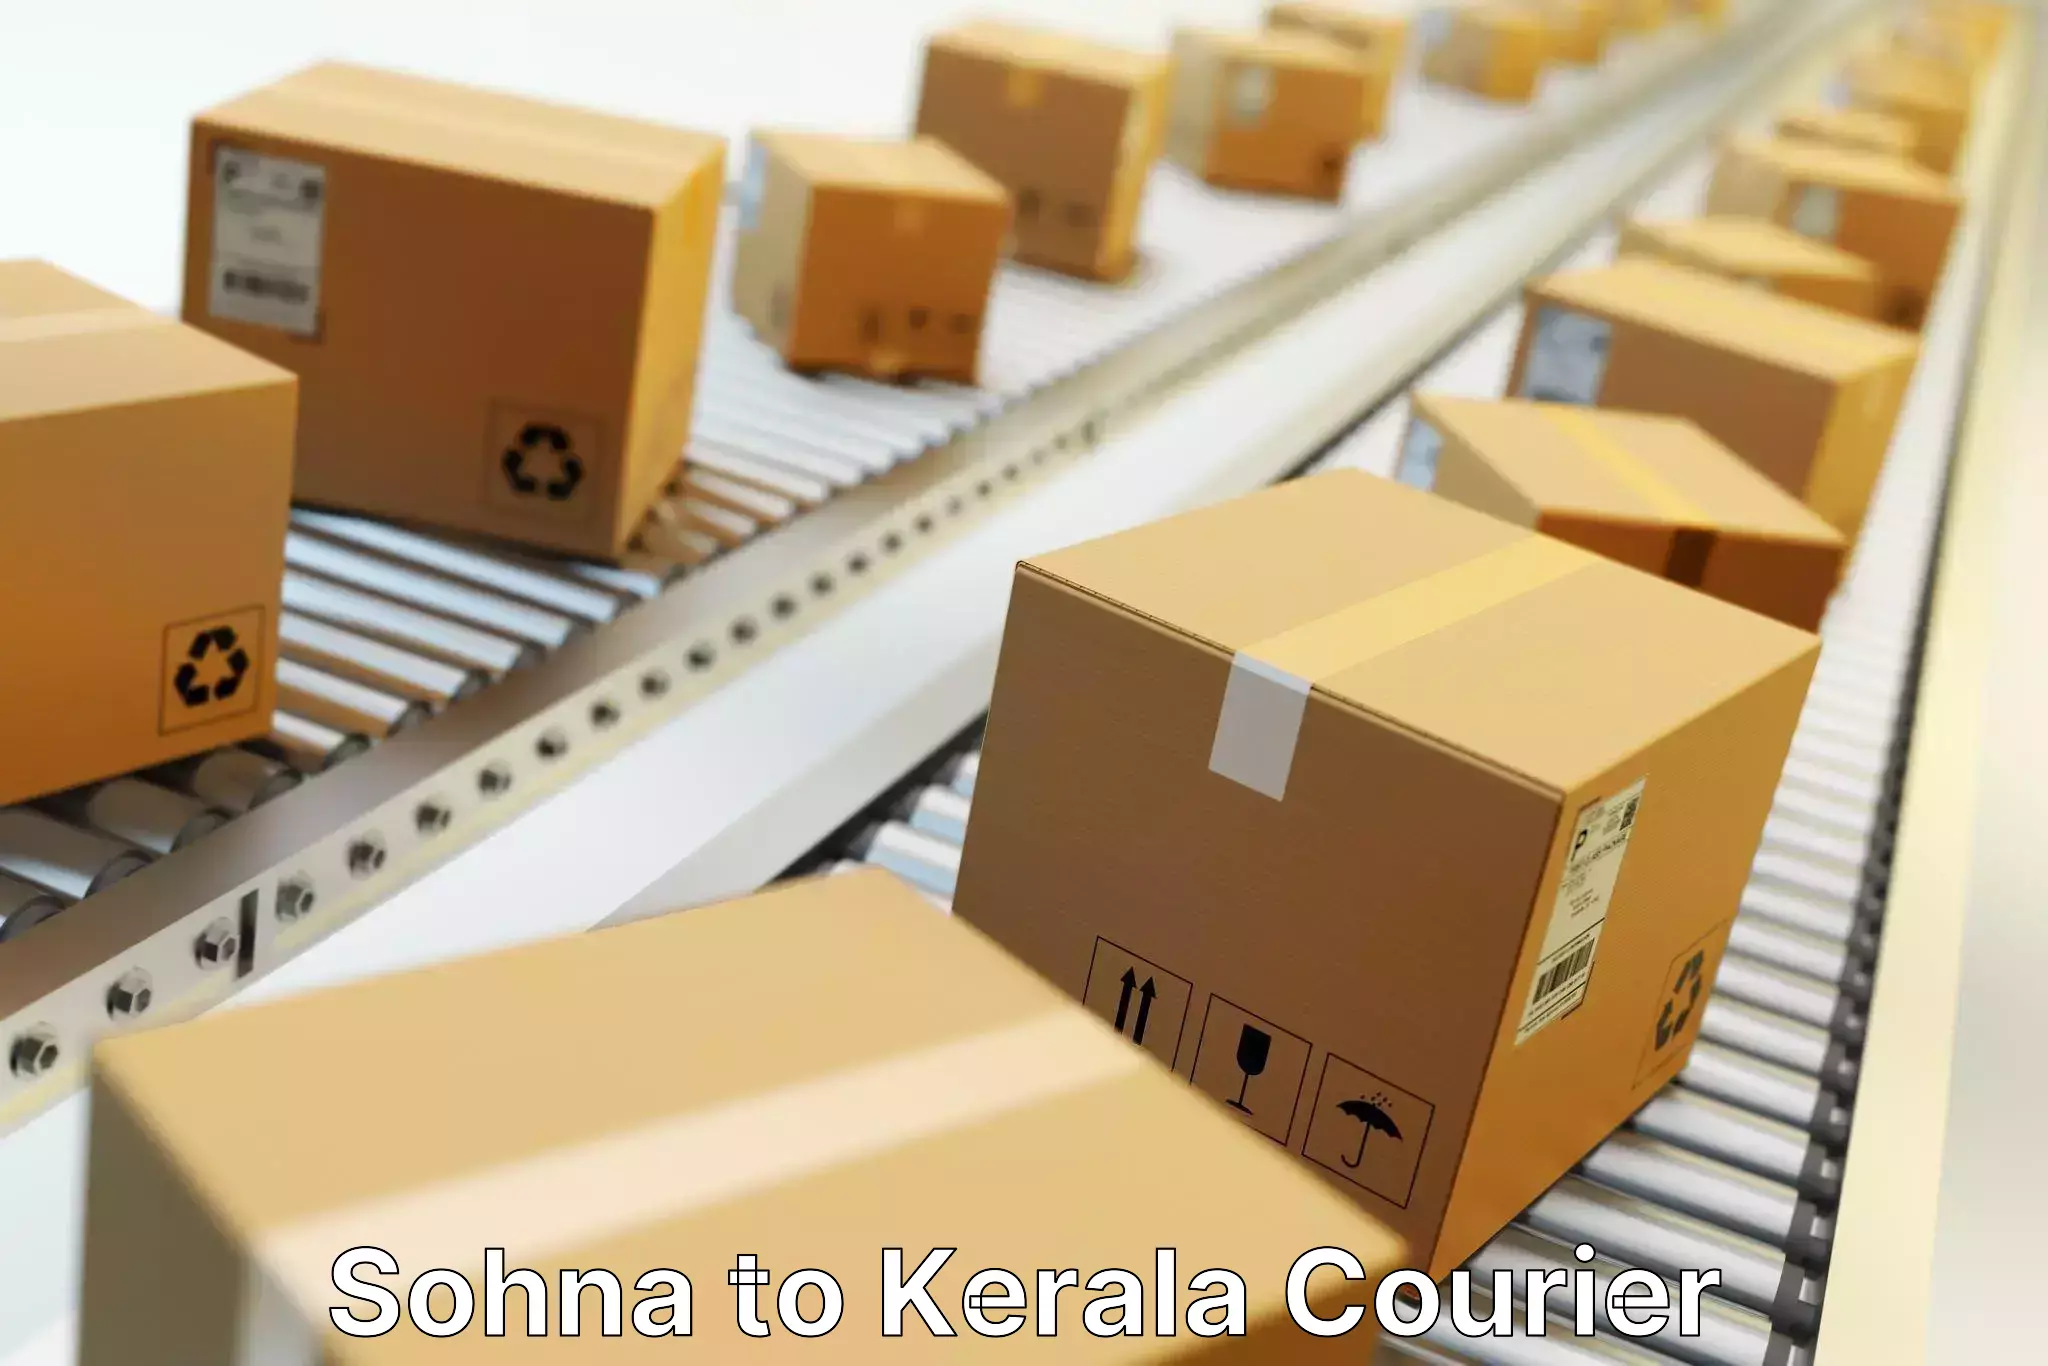 State-of-the-art courier technology Sohna to Kerala